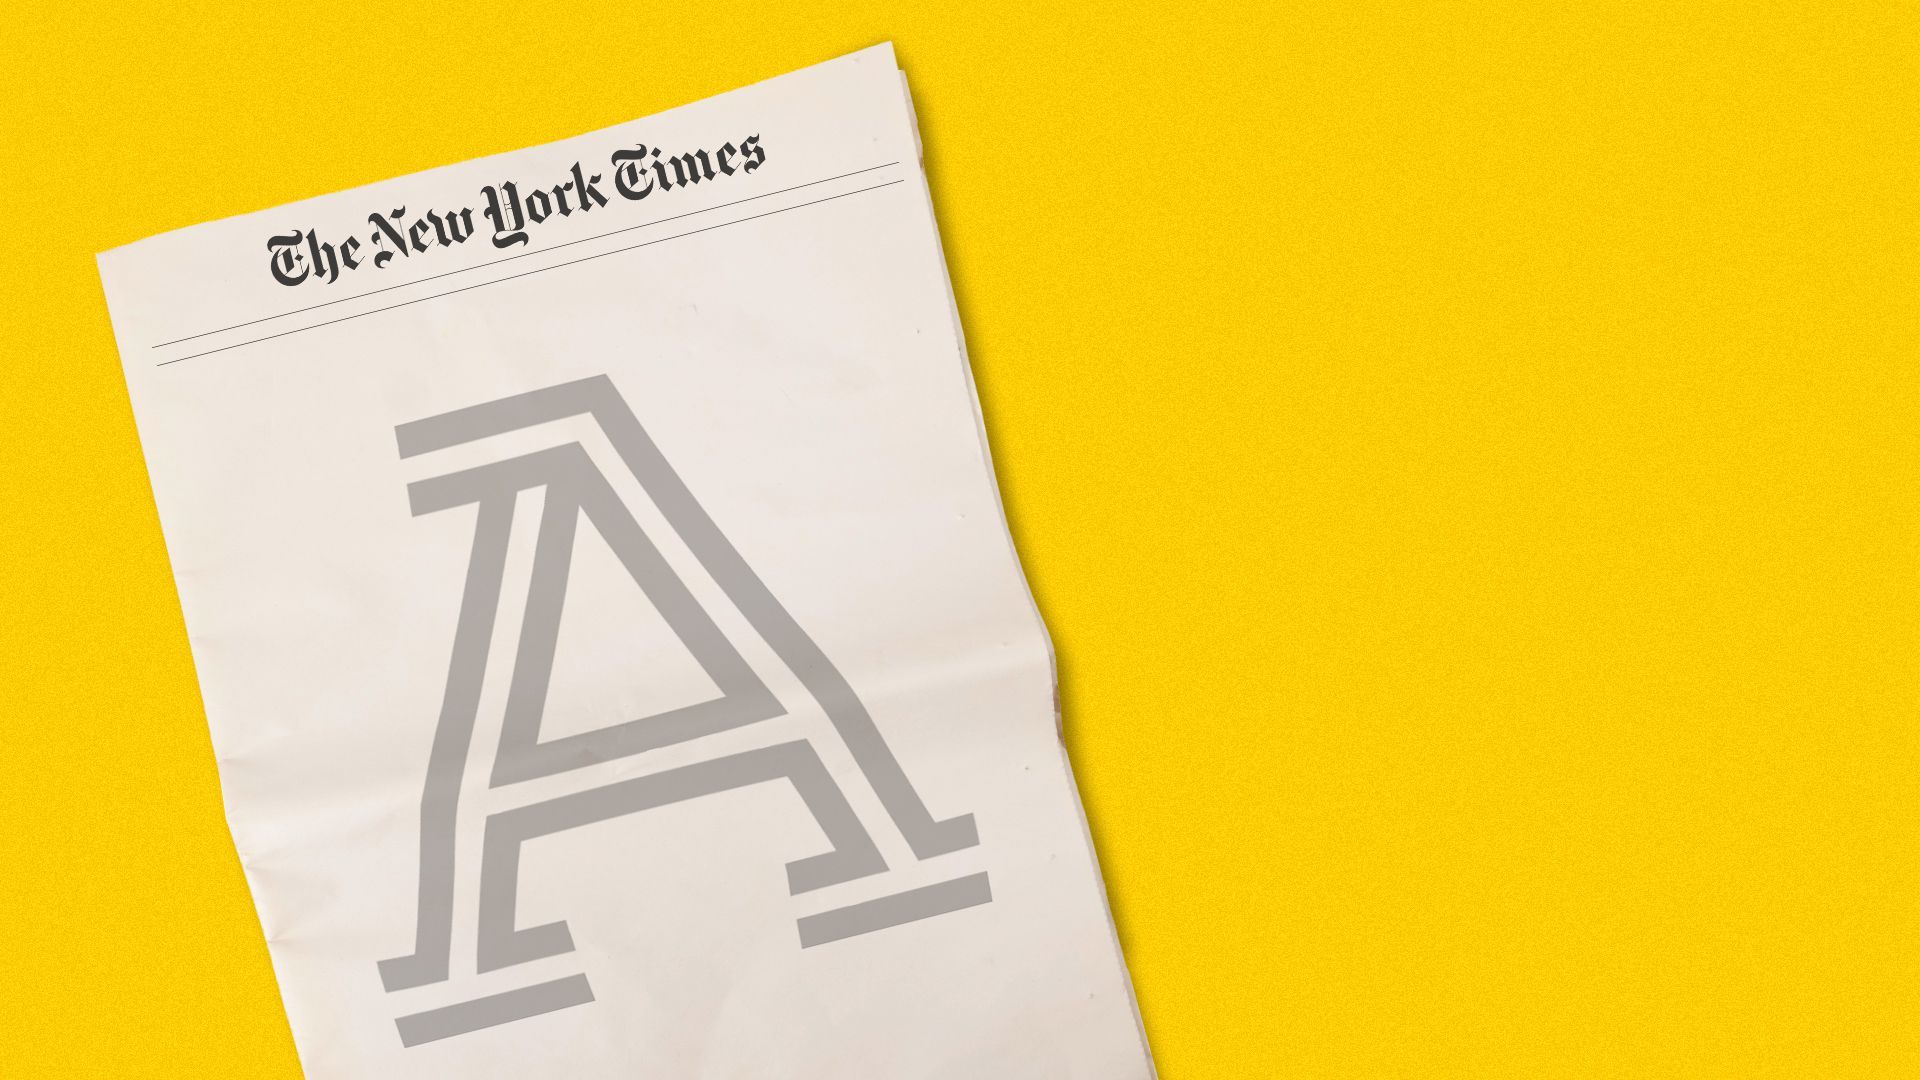 Illustration of a New York Times print newspaper with The Athletic logo on the front page